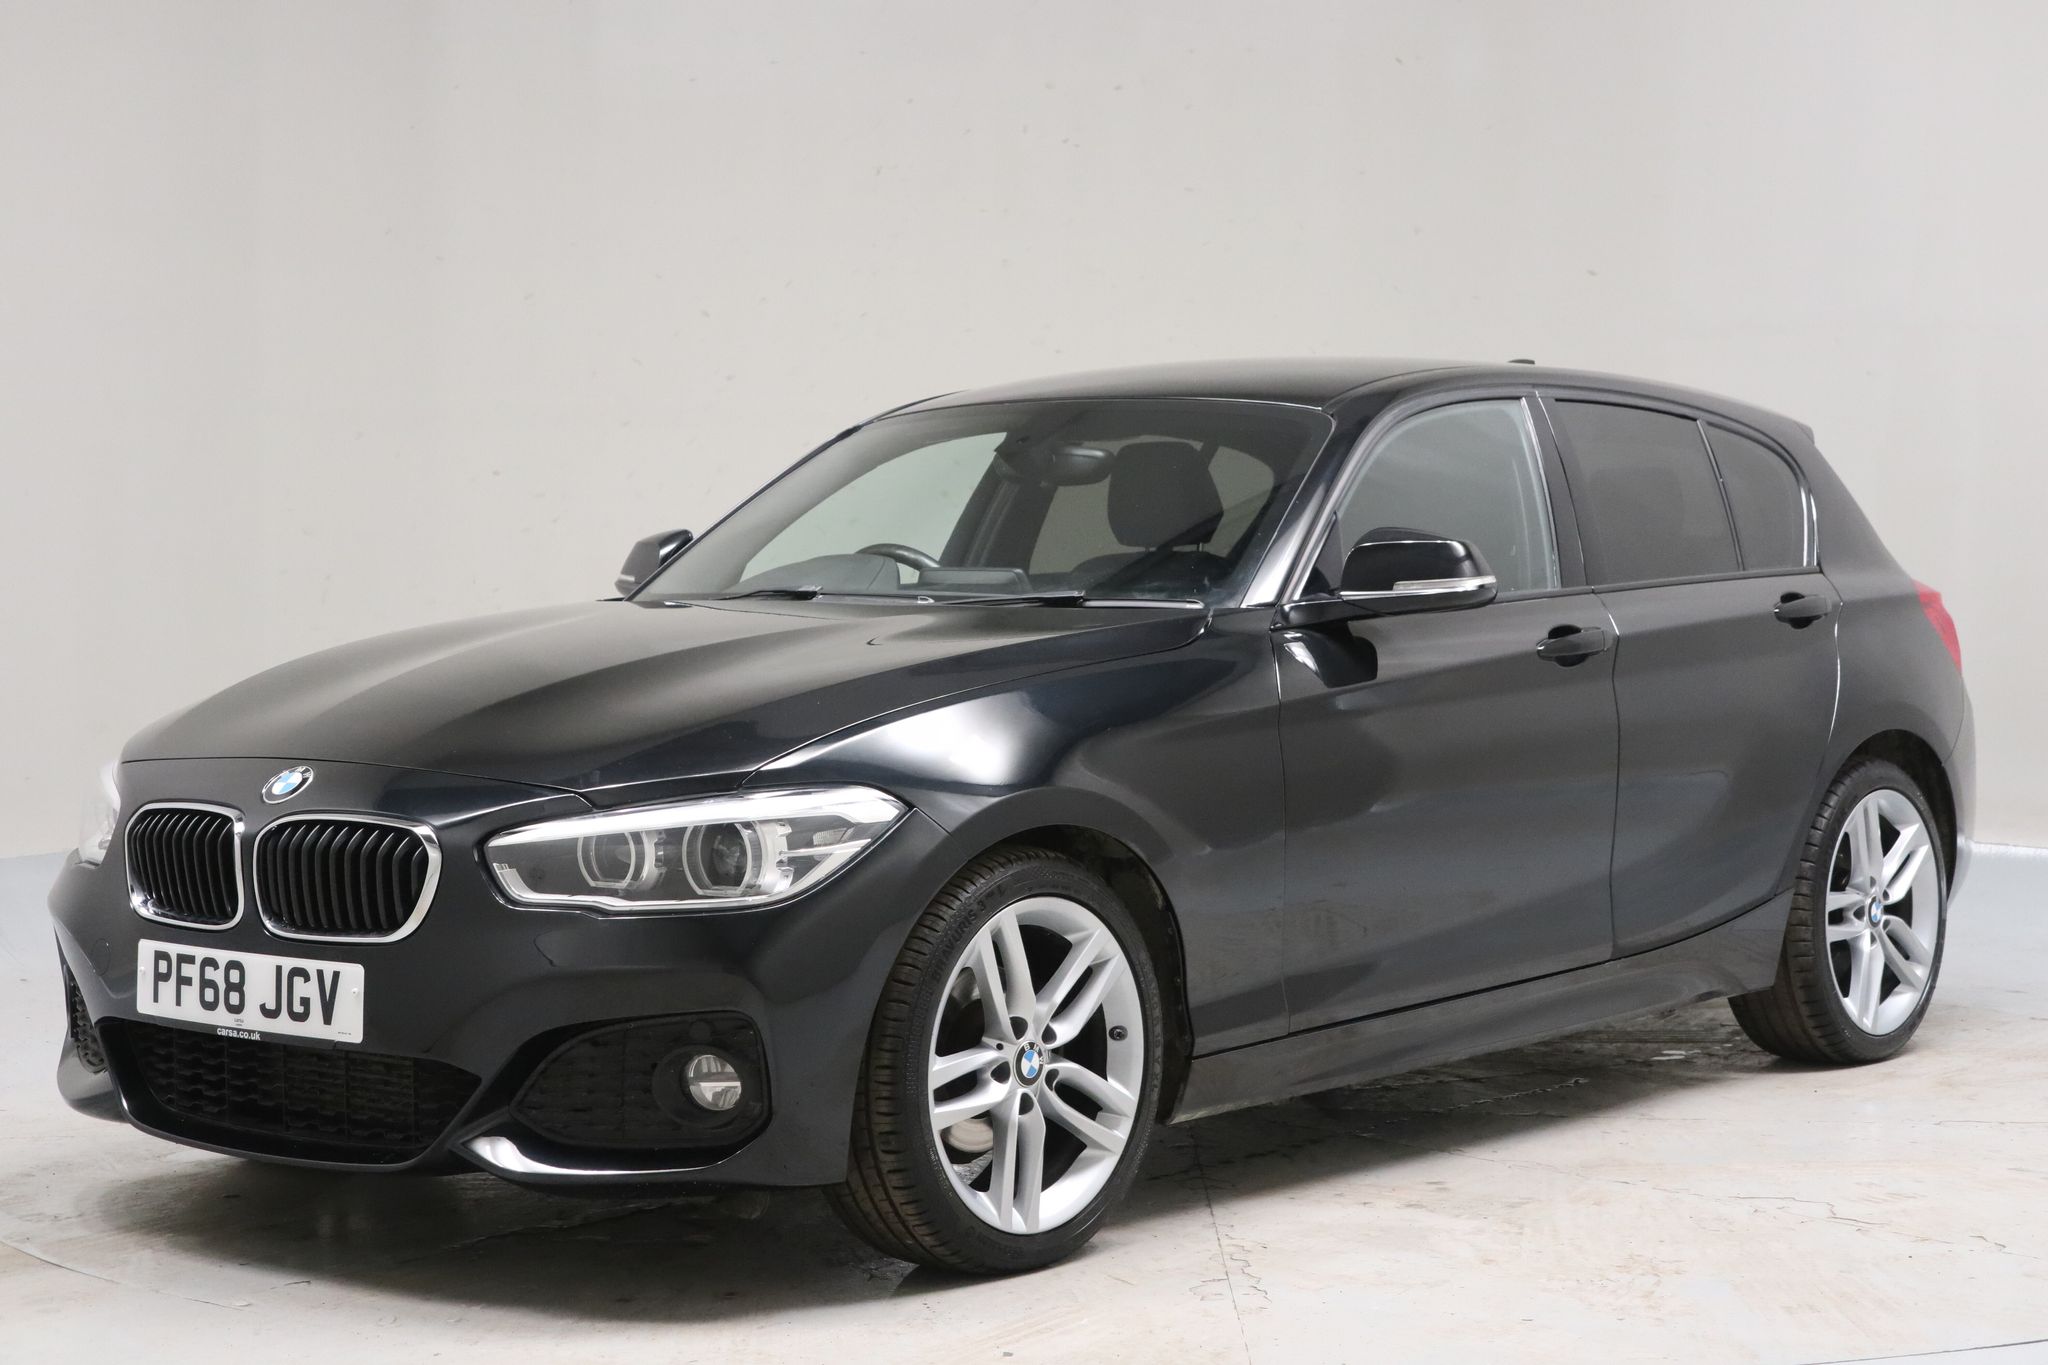 2018 used BMW 1 Series 2.0 118d M Sport (150 ps)